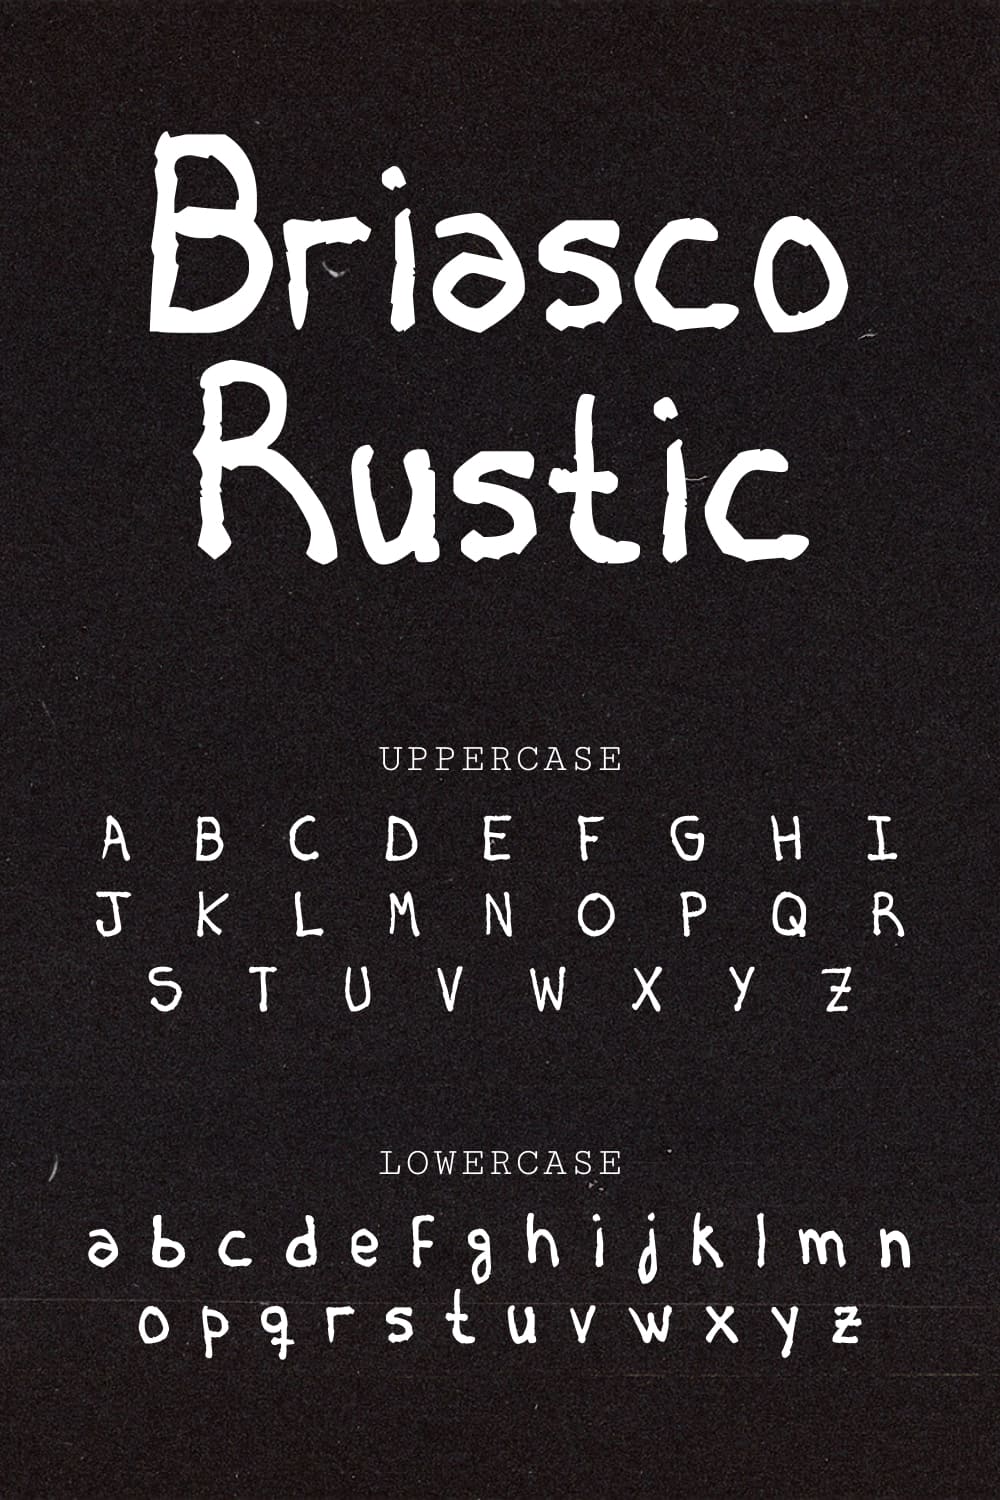 Briasco Rustic Free Font Pinterest uppercase and lowercase preview.